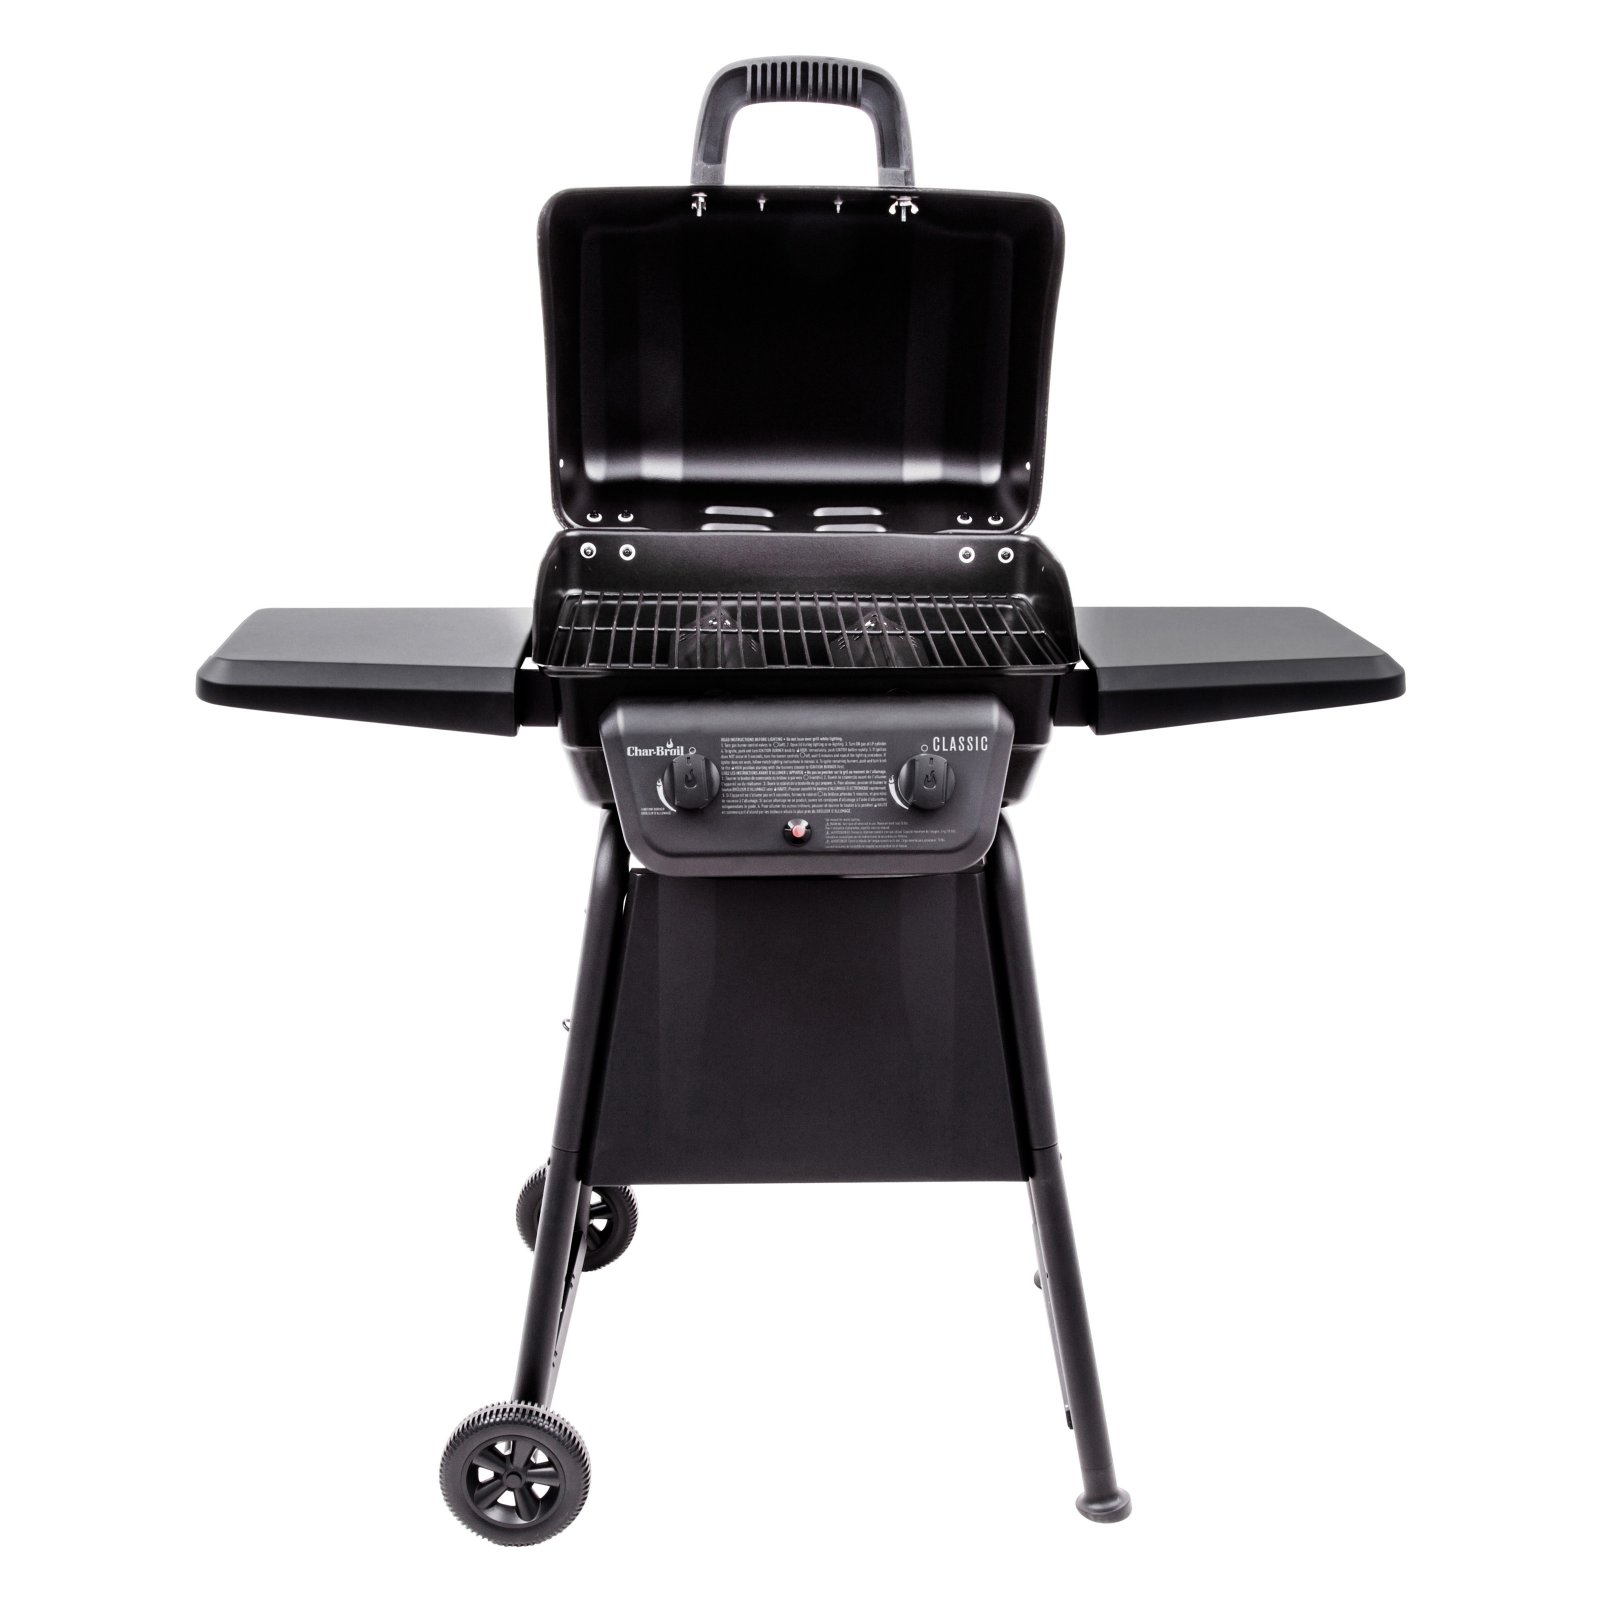 Char-Broil 463672717 Gas Grill Stainless Steel - image 4 of 10